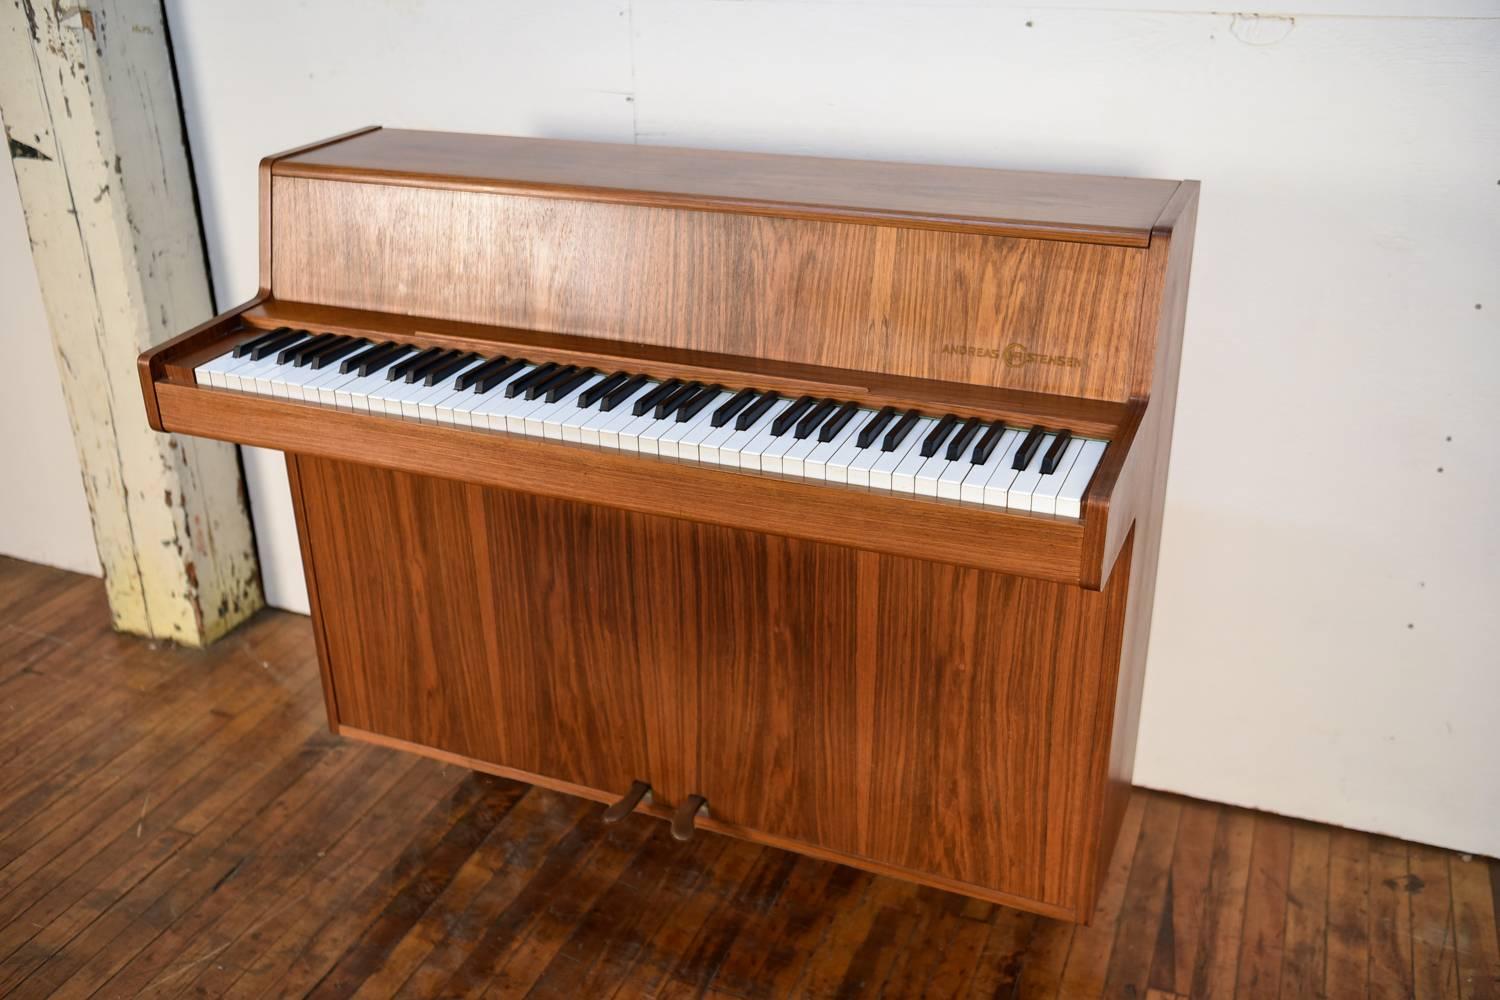 Andreas Christensen is a collectable brand of piano. This Andreas Christensen Picolino upright piano is one of the more simplistic designs they have made. Compact size making it a good fit for tight spaces.